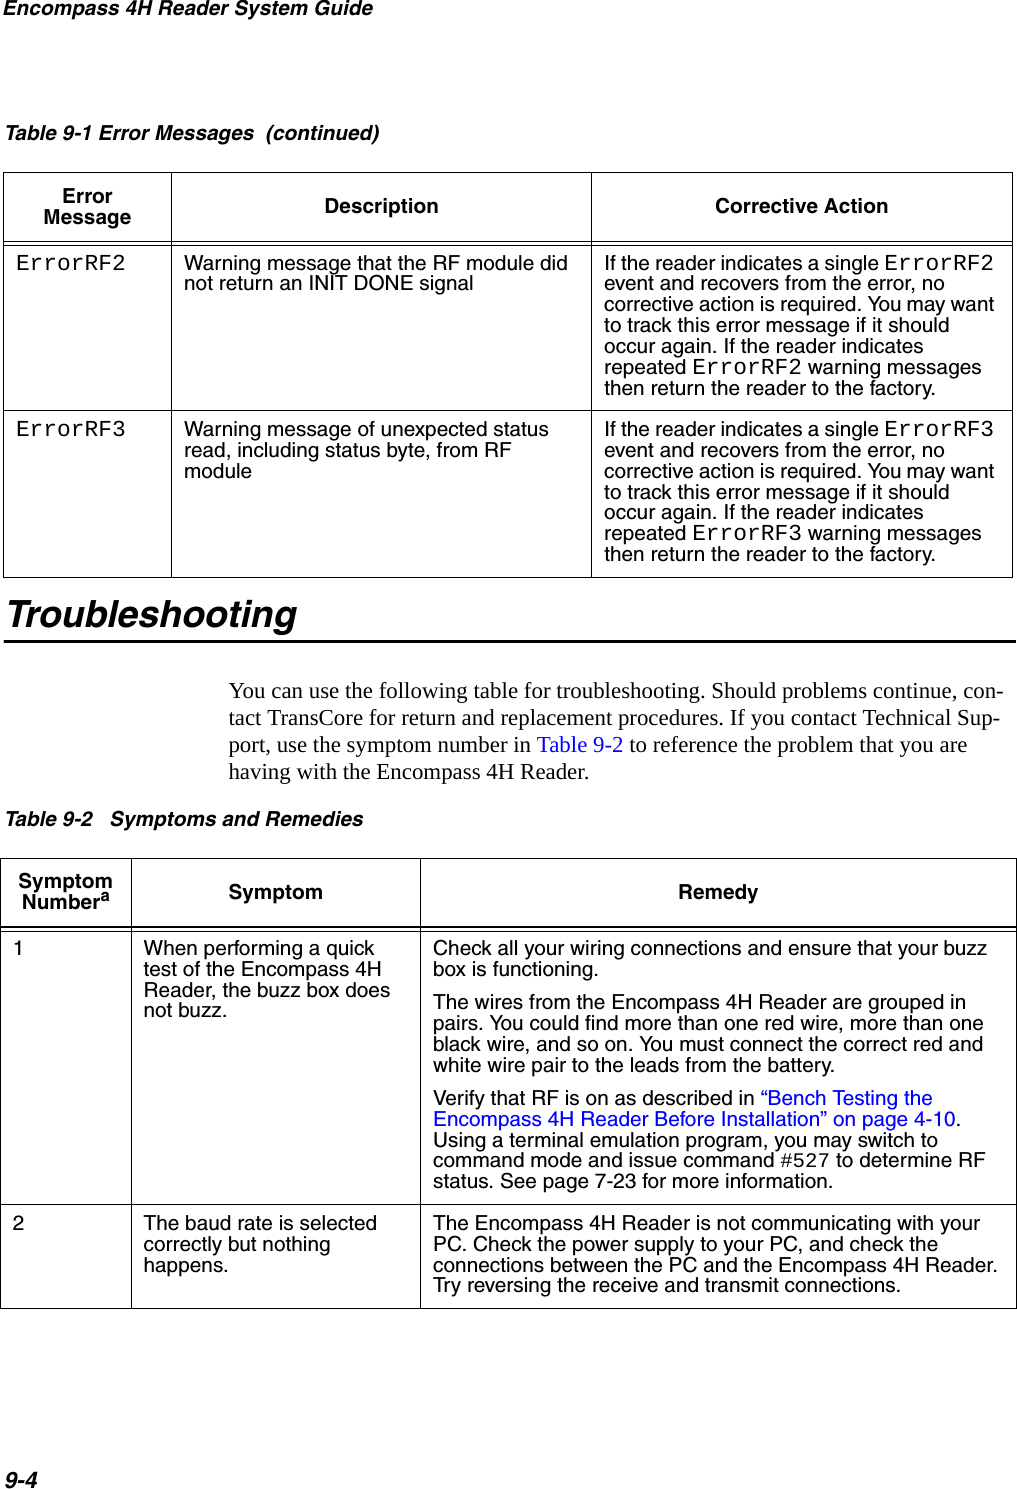 Encompass 4H Reader System Guide9-4TroubleshootingYou can use the following table for troubleshooting. Should problems continue, con-tact TransCore for return and replacement procedures. If you contact Technical Sup-port, use the symptom number in Table 9-2 to reference the problem that you are having with the Encompass 4H Reader. ErrorRF2 Warning message that the RF module did not return an INIT DONE signalIf the reader indicates a single ErrorRF2 event and recovers from the error, no corrective action is required. You may want to track this error message if it should occur again. If the reader indicates repeated ErrorRF2 warning messages then return the reader to the factory.ErrorRF3 Warning message of unexpected status read, including status byte, from RF moduleIf the reader indicates a single ErrorRF3 event and recovers from the error, no corrective action is required. You may want to track this error message if it should occur again. If the reader indicates repeated ErrorRF3 warning messages then return the reader to the factory.Table 9-1 Error Messages  (continued)Error Message Description Corrective ActionTable 9-2   Symptoms and Remedies Symptom NumberaSymptom Remedy1When performing a quick test of the Encompass 4H Reader, the buzz box does not buzz.Check all your wiring connections and ensure that your buzz box is functioning. The wires from the Encompass 4H Reader are grouped in pairs. You could find more than one red wire, more than one black wire, and so on. You must connect the correct red and white wire pair to the leads from the battery. Verify that RF is on as described in “Bench Testing the Encompass 4H Reader Before Installation” on page 4-10. Using a terminal emulation program, you may switch to command mode and issue command #527 to determine RF status. See page 7-23 for more information.2The baud rate is selected correctly but nothing happens.The Encompass 4H Reader is not communicating with your PC. Check the power supply to your PC, and check the connections between the PC and the Encompass 4H Reader. Try reversing the receive and transmit connections.